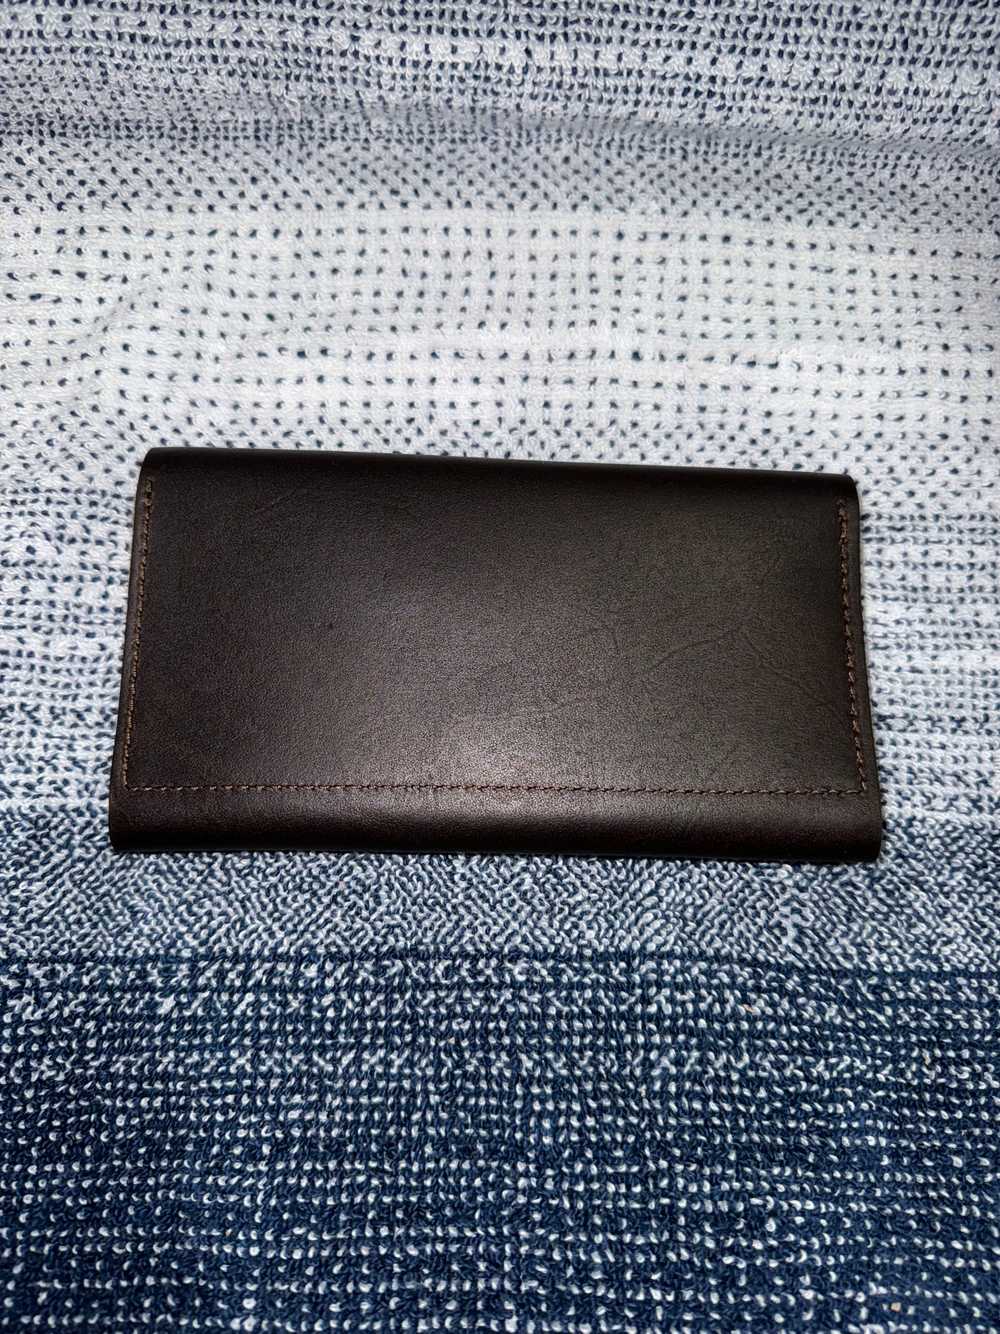 Portland Leather Leather Rancher Wallet - image 3